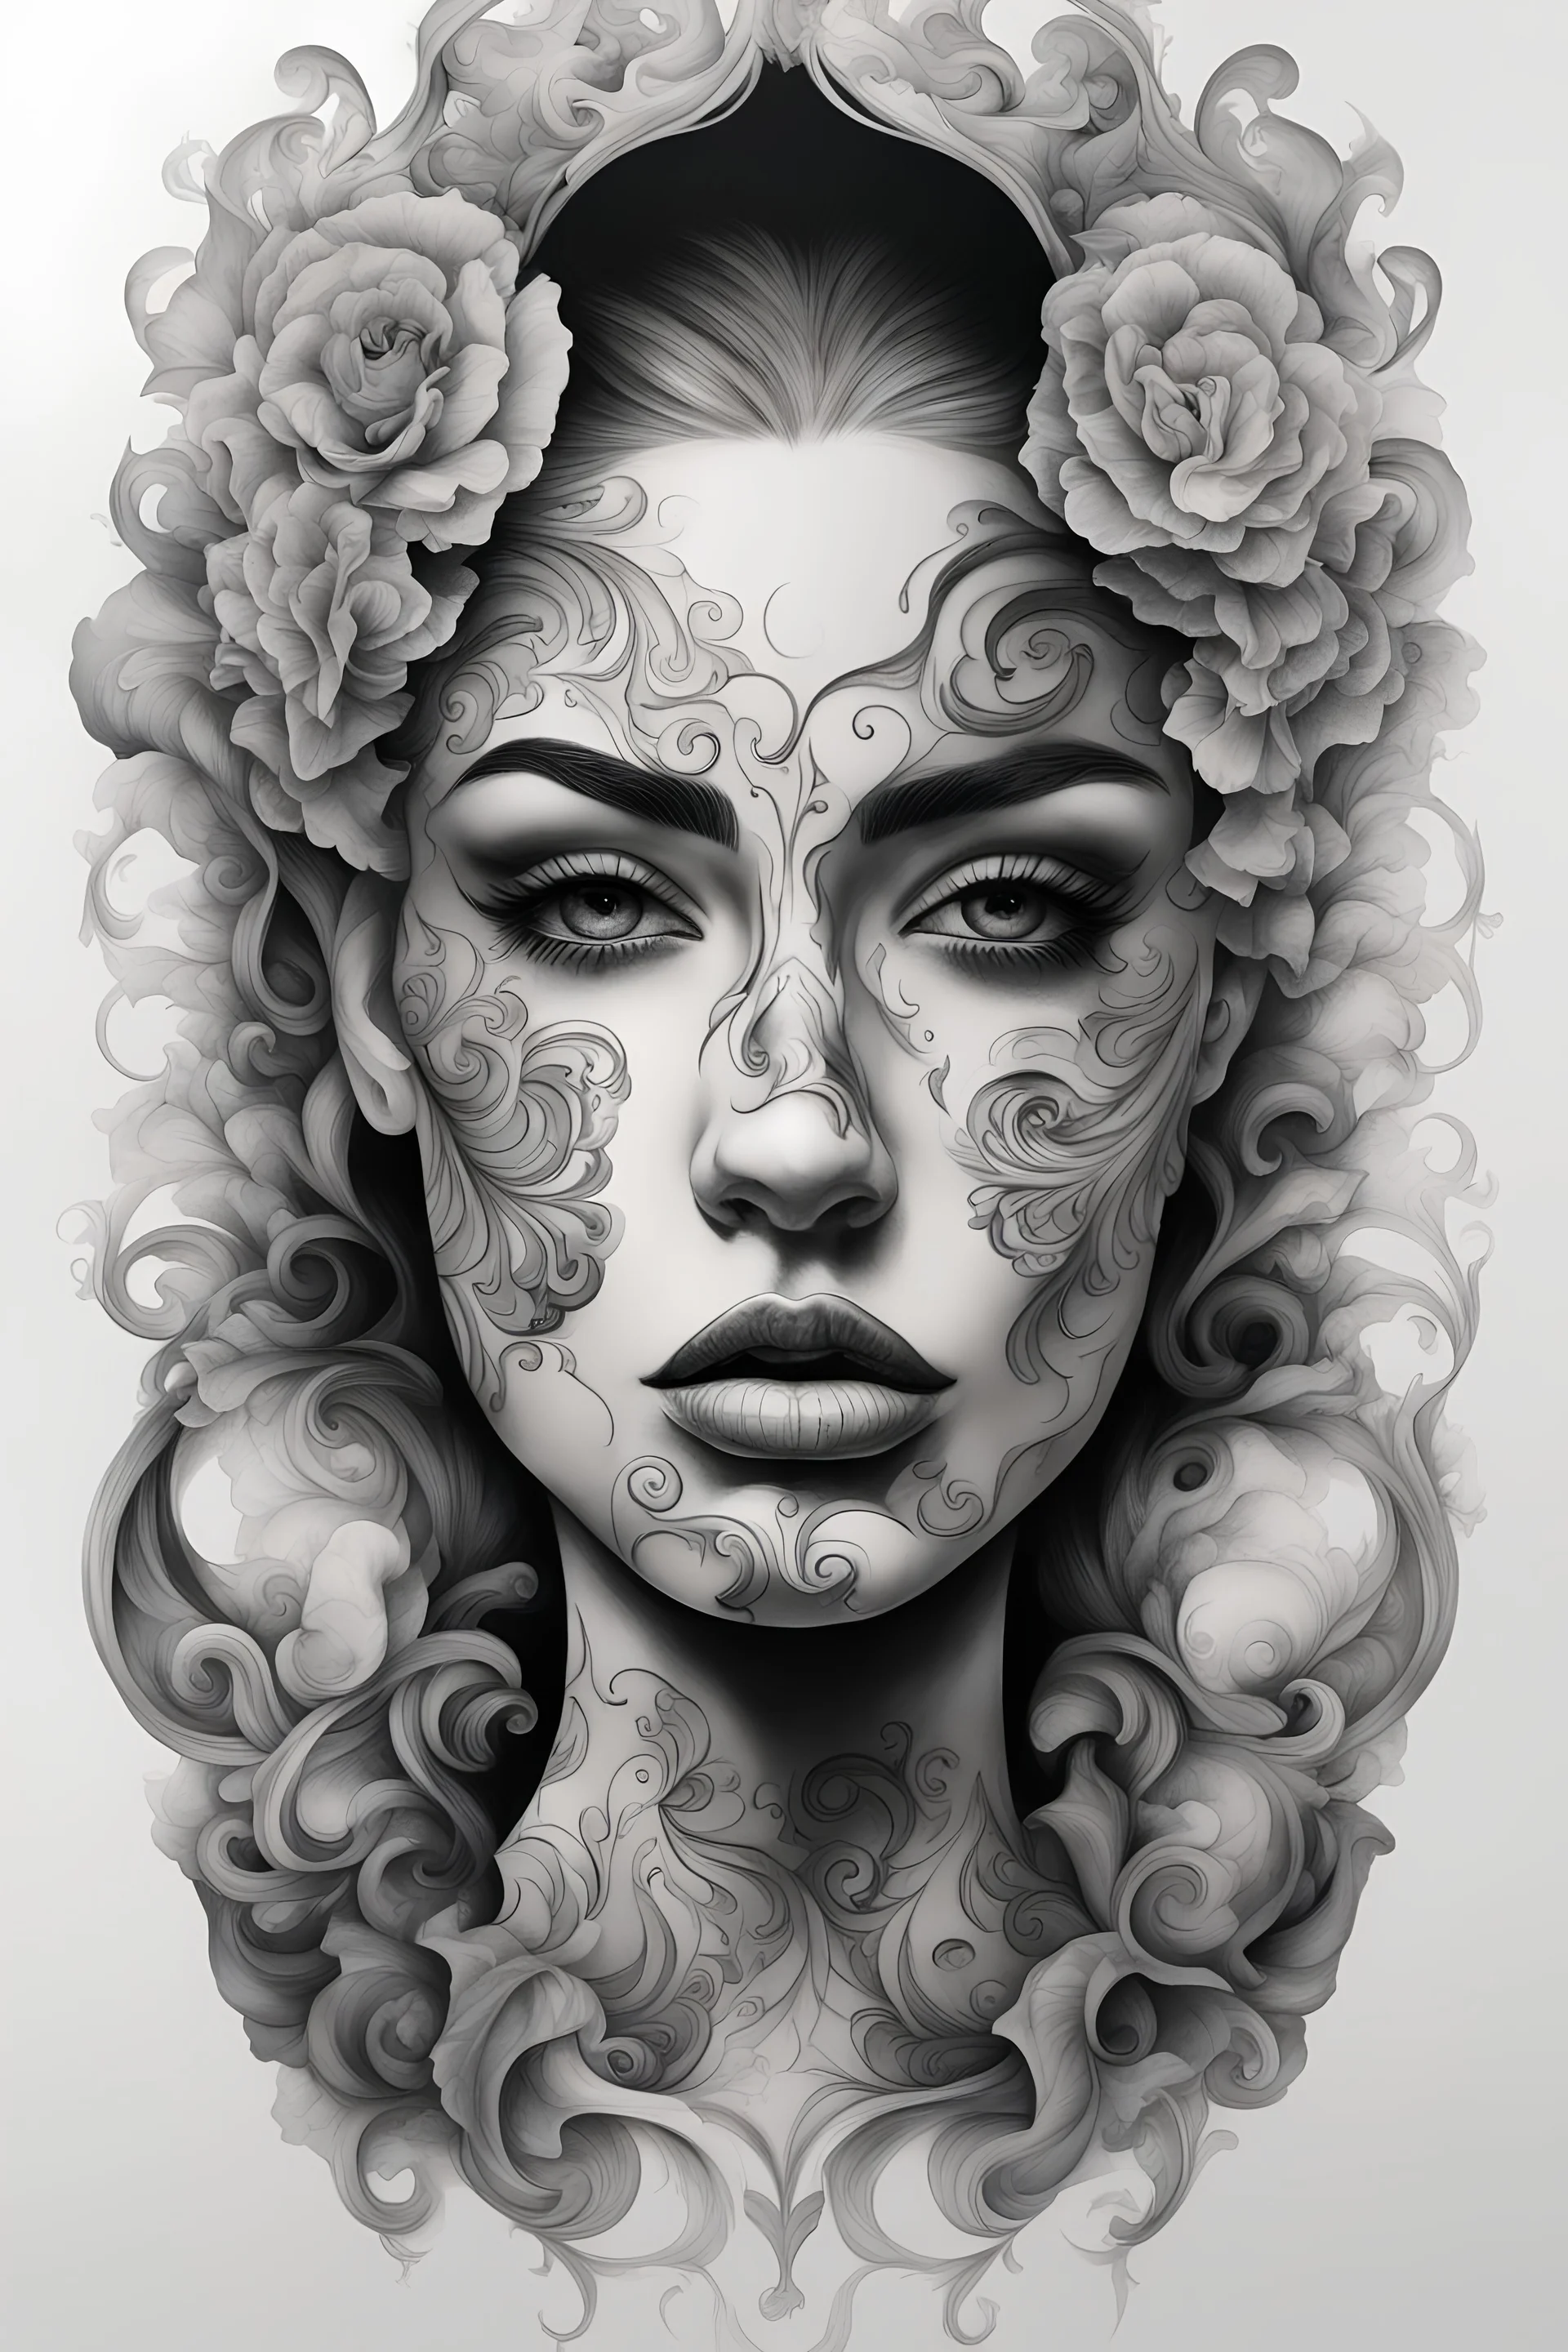 A realistic drawing in negative space black ink on white background of a beautiful women with abstract face tattoos to enhance her face in a mirror baroque with very defined and correct details and brushstrokes smoke around it